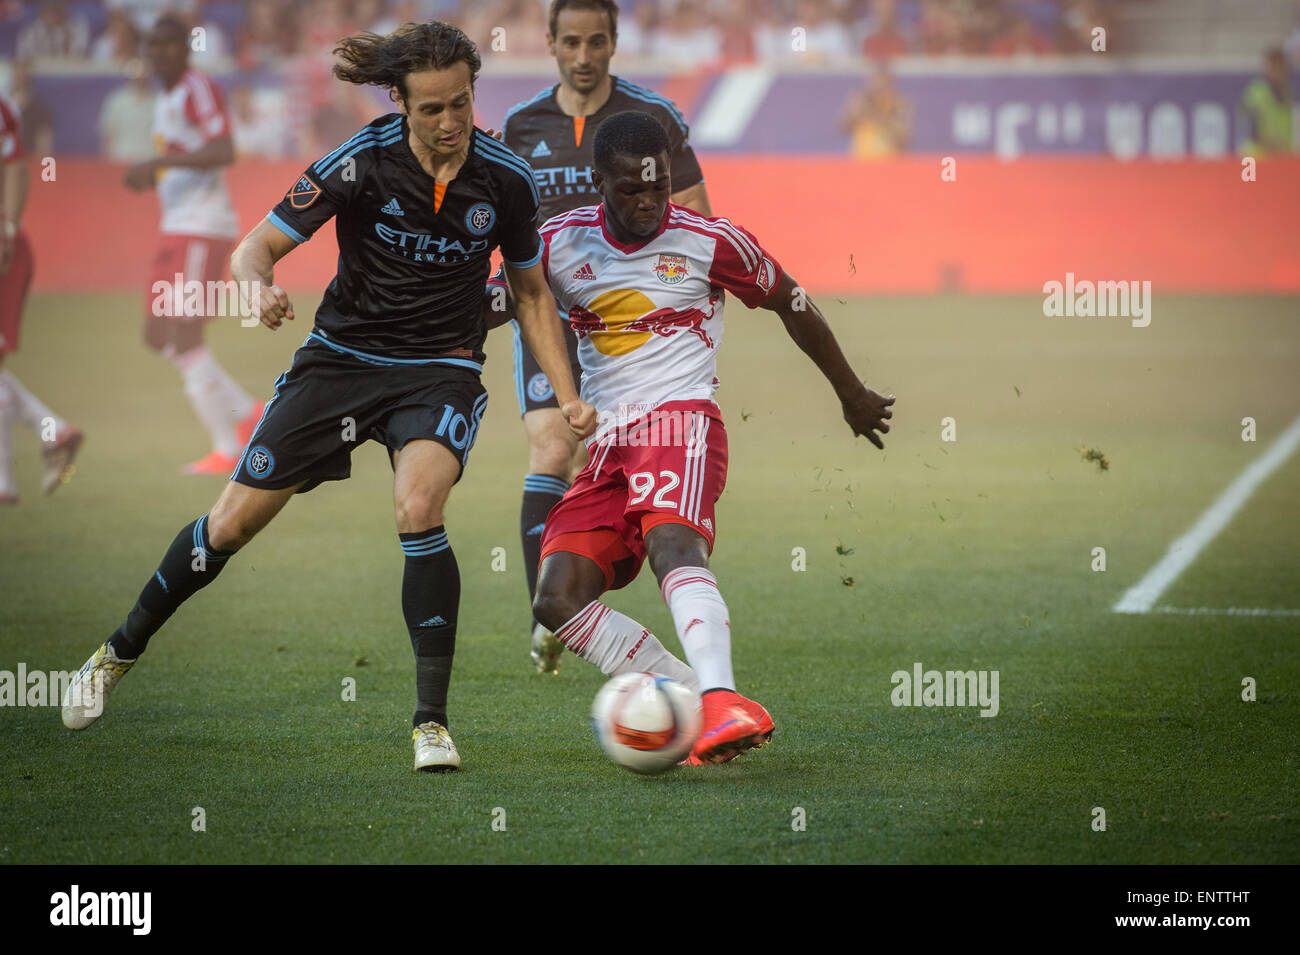 Harrison, New Jersey, USA. 10th May, 2015. NYCFC's MIX DISKERUD challenges NY Red Bulls' KEMAR LAWRENCE for the ball in the 1st half, New York Red Bulls vs. New York City FC, Red Bull Arena, Sunday May 10, 2015. This is the inaugural derby between clubs. © Bryan Smith/ZUMA Wire/Alamy Live News Stock Photo